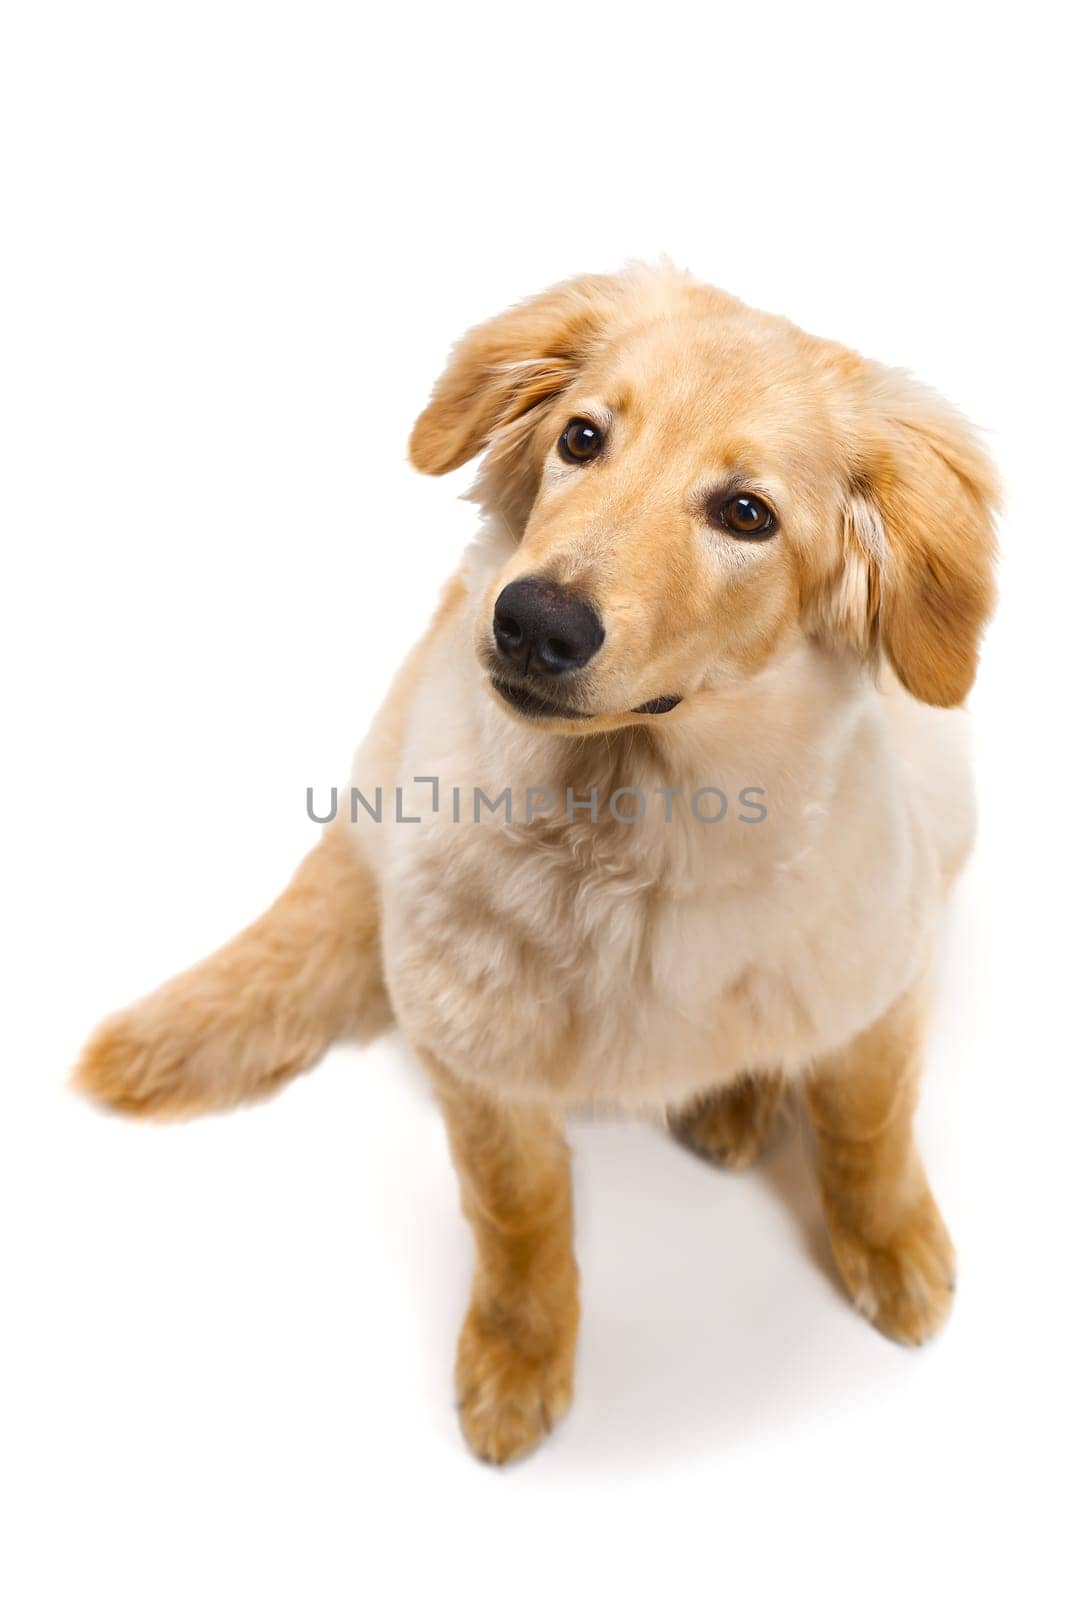 Isolated blond hovawart puppy. Studio shot of a cute Hovawart puppy. golden retriever puppy. 5 month old puppy